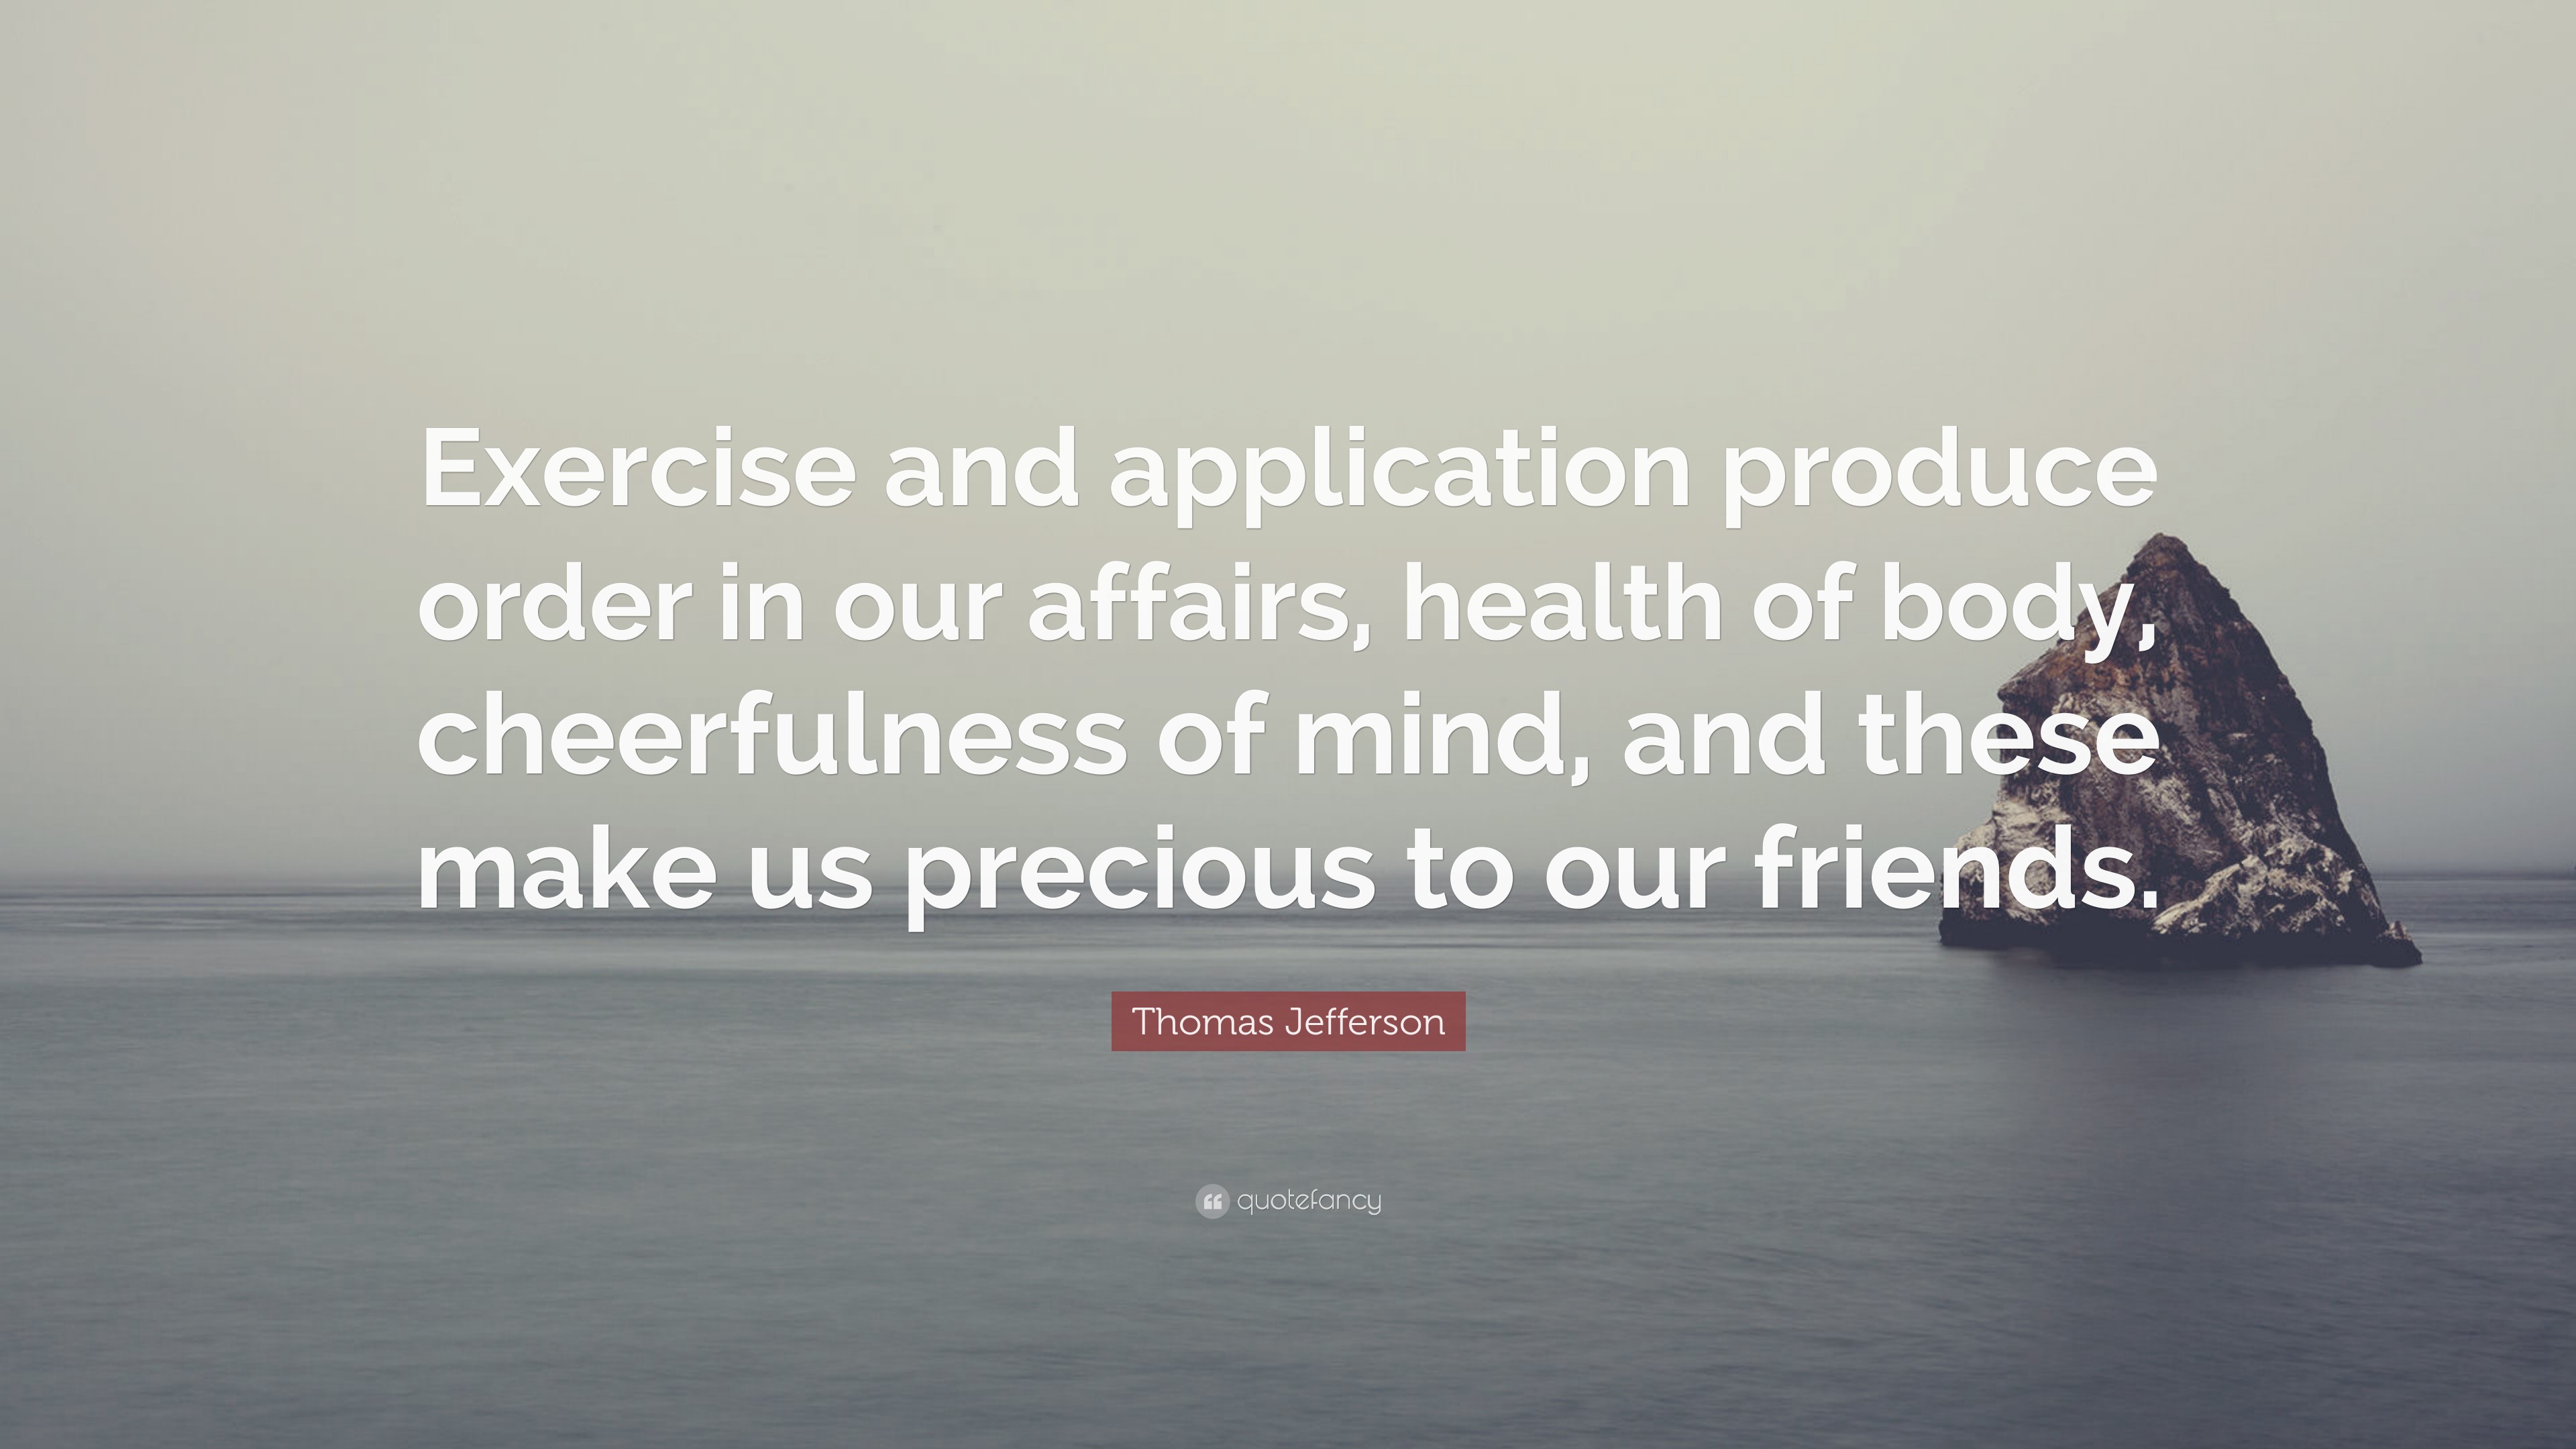 Thomas Jefferson Quote: “Exercise and application produce order in our